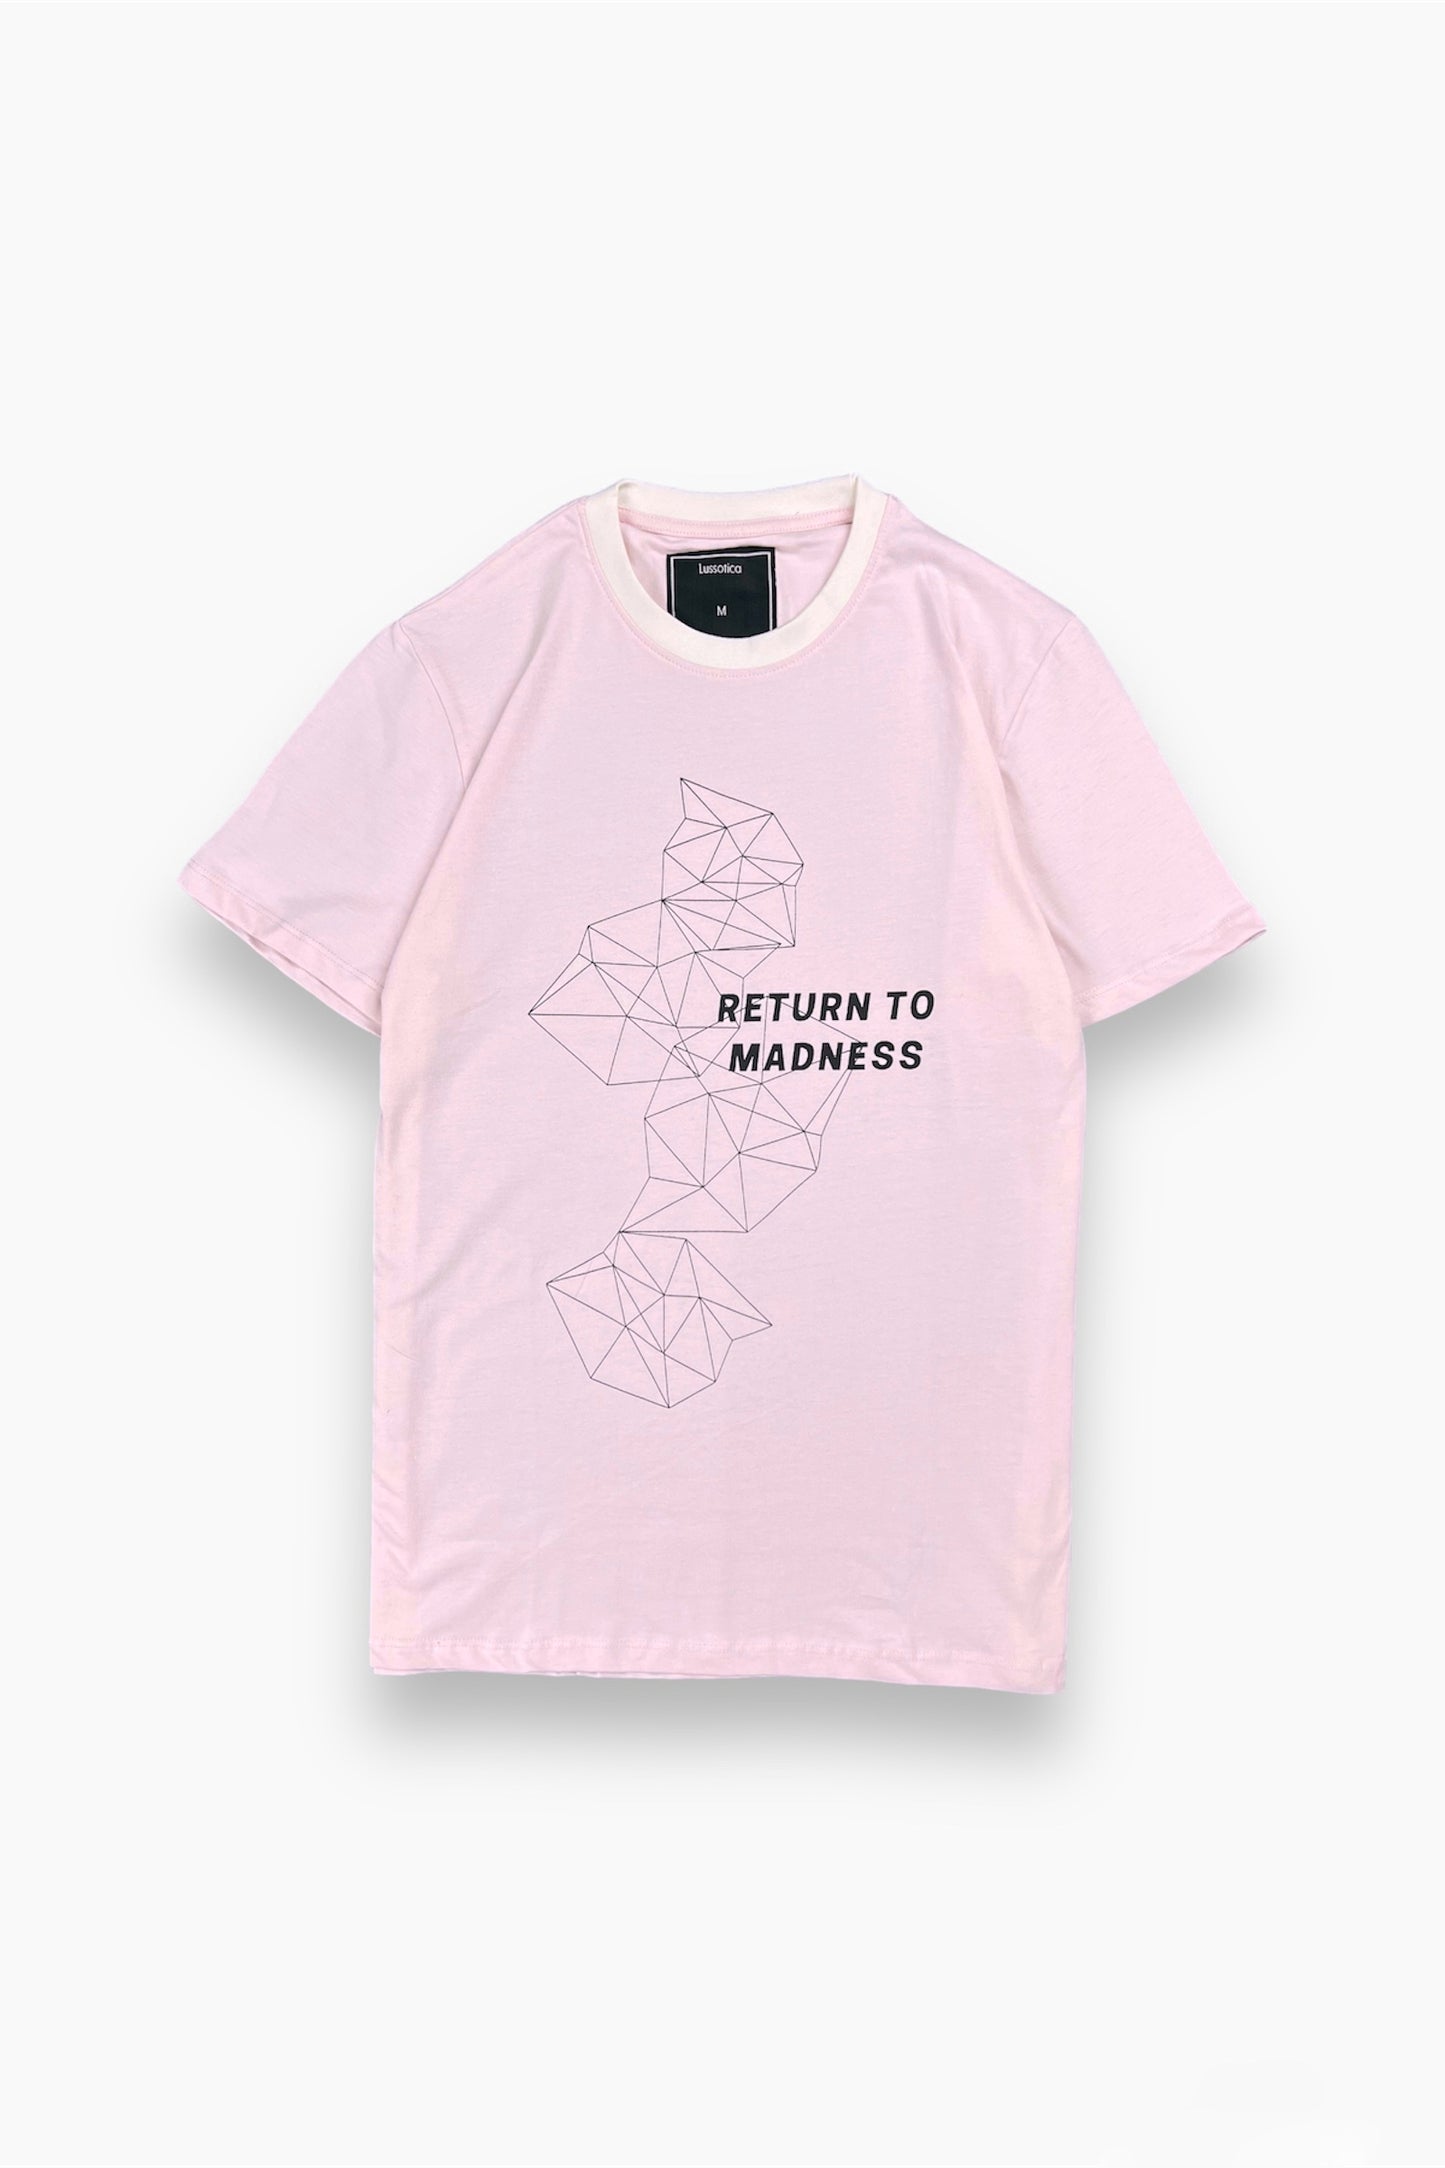 Graphic Tees by Lussotica – Return To Madness – GT780